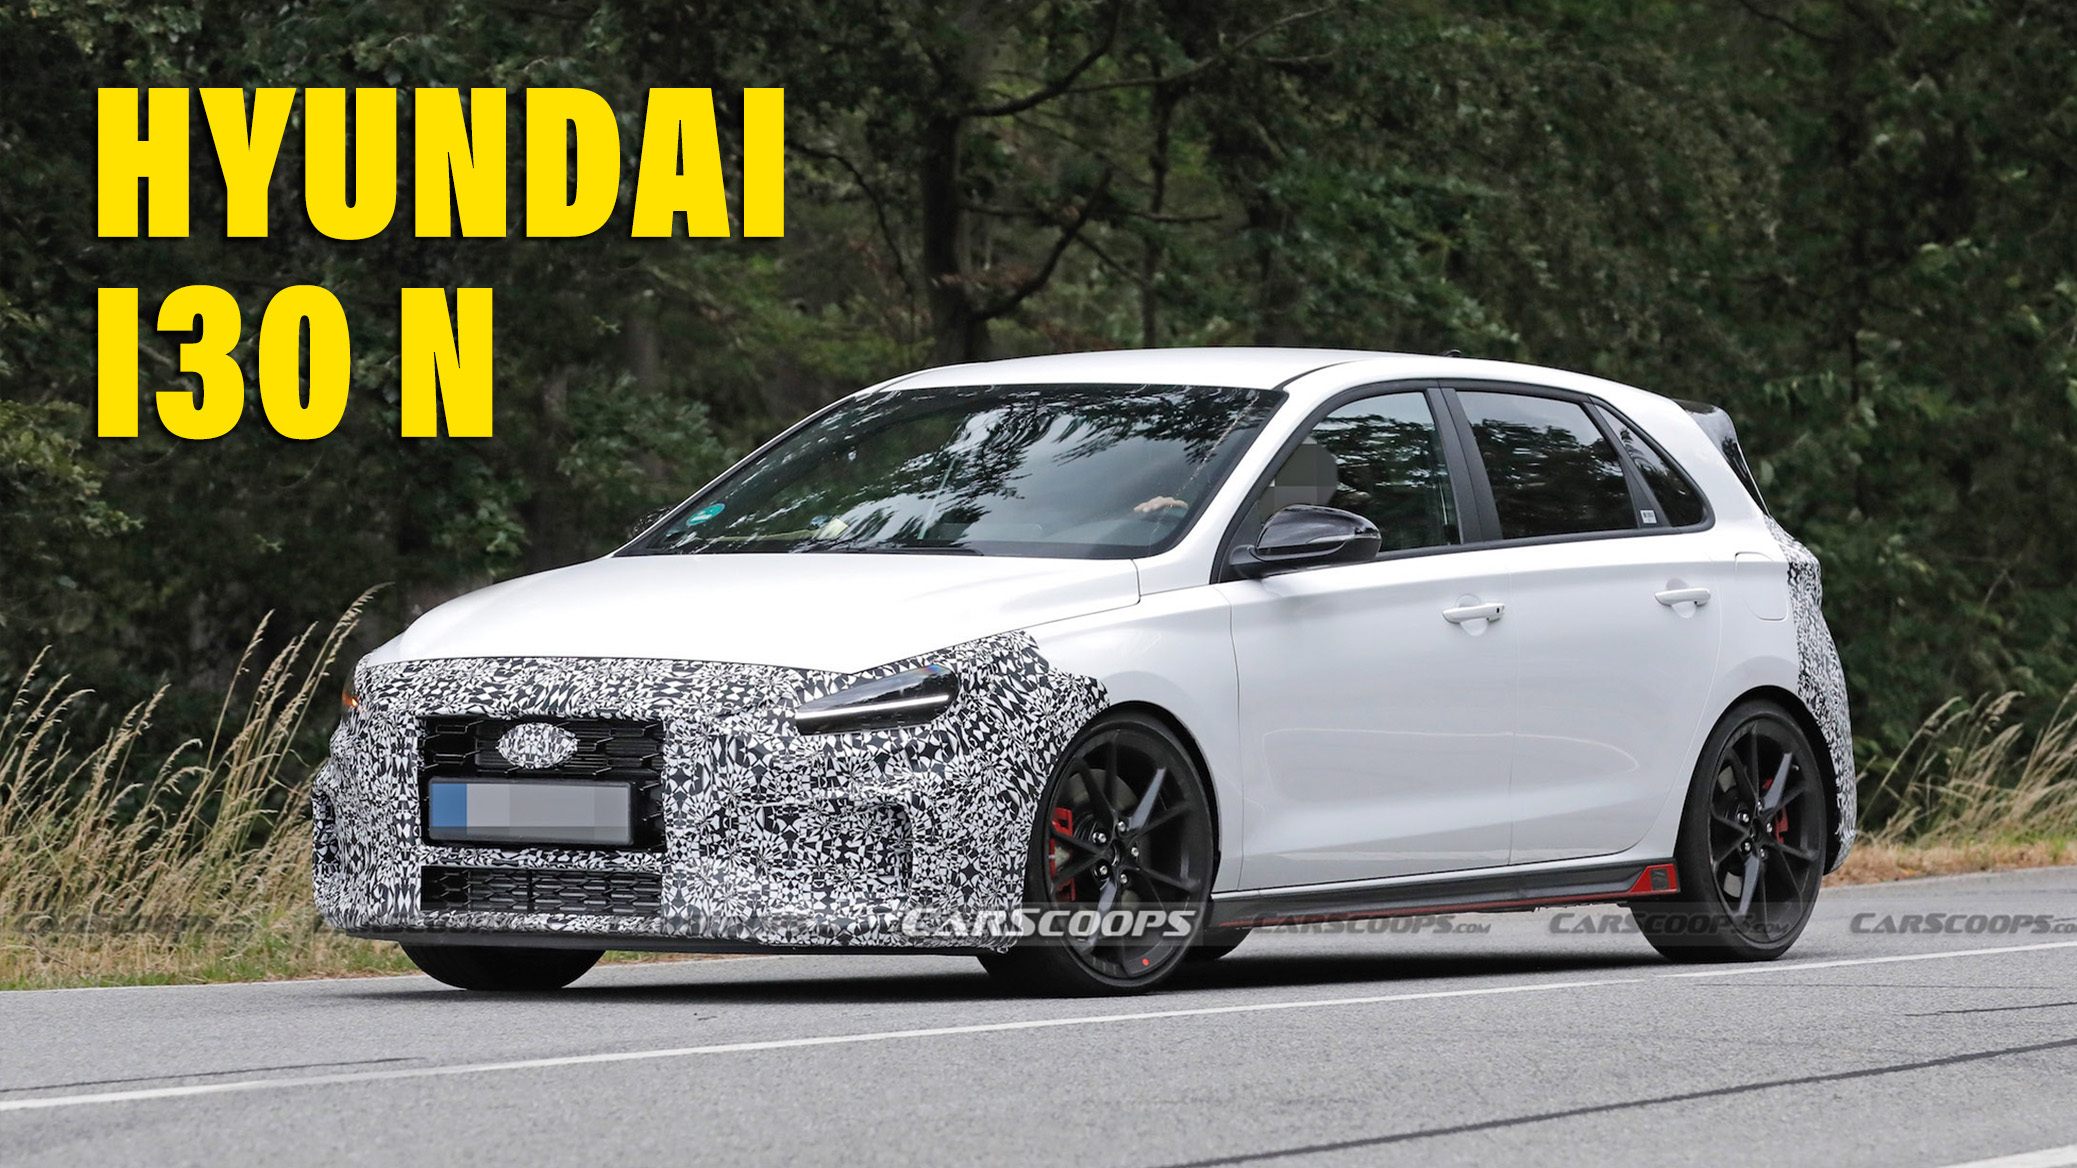 REVIEW: Hyundai i30 N has the chops to fight the establishment